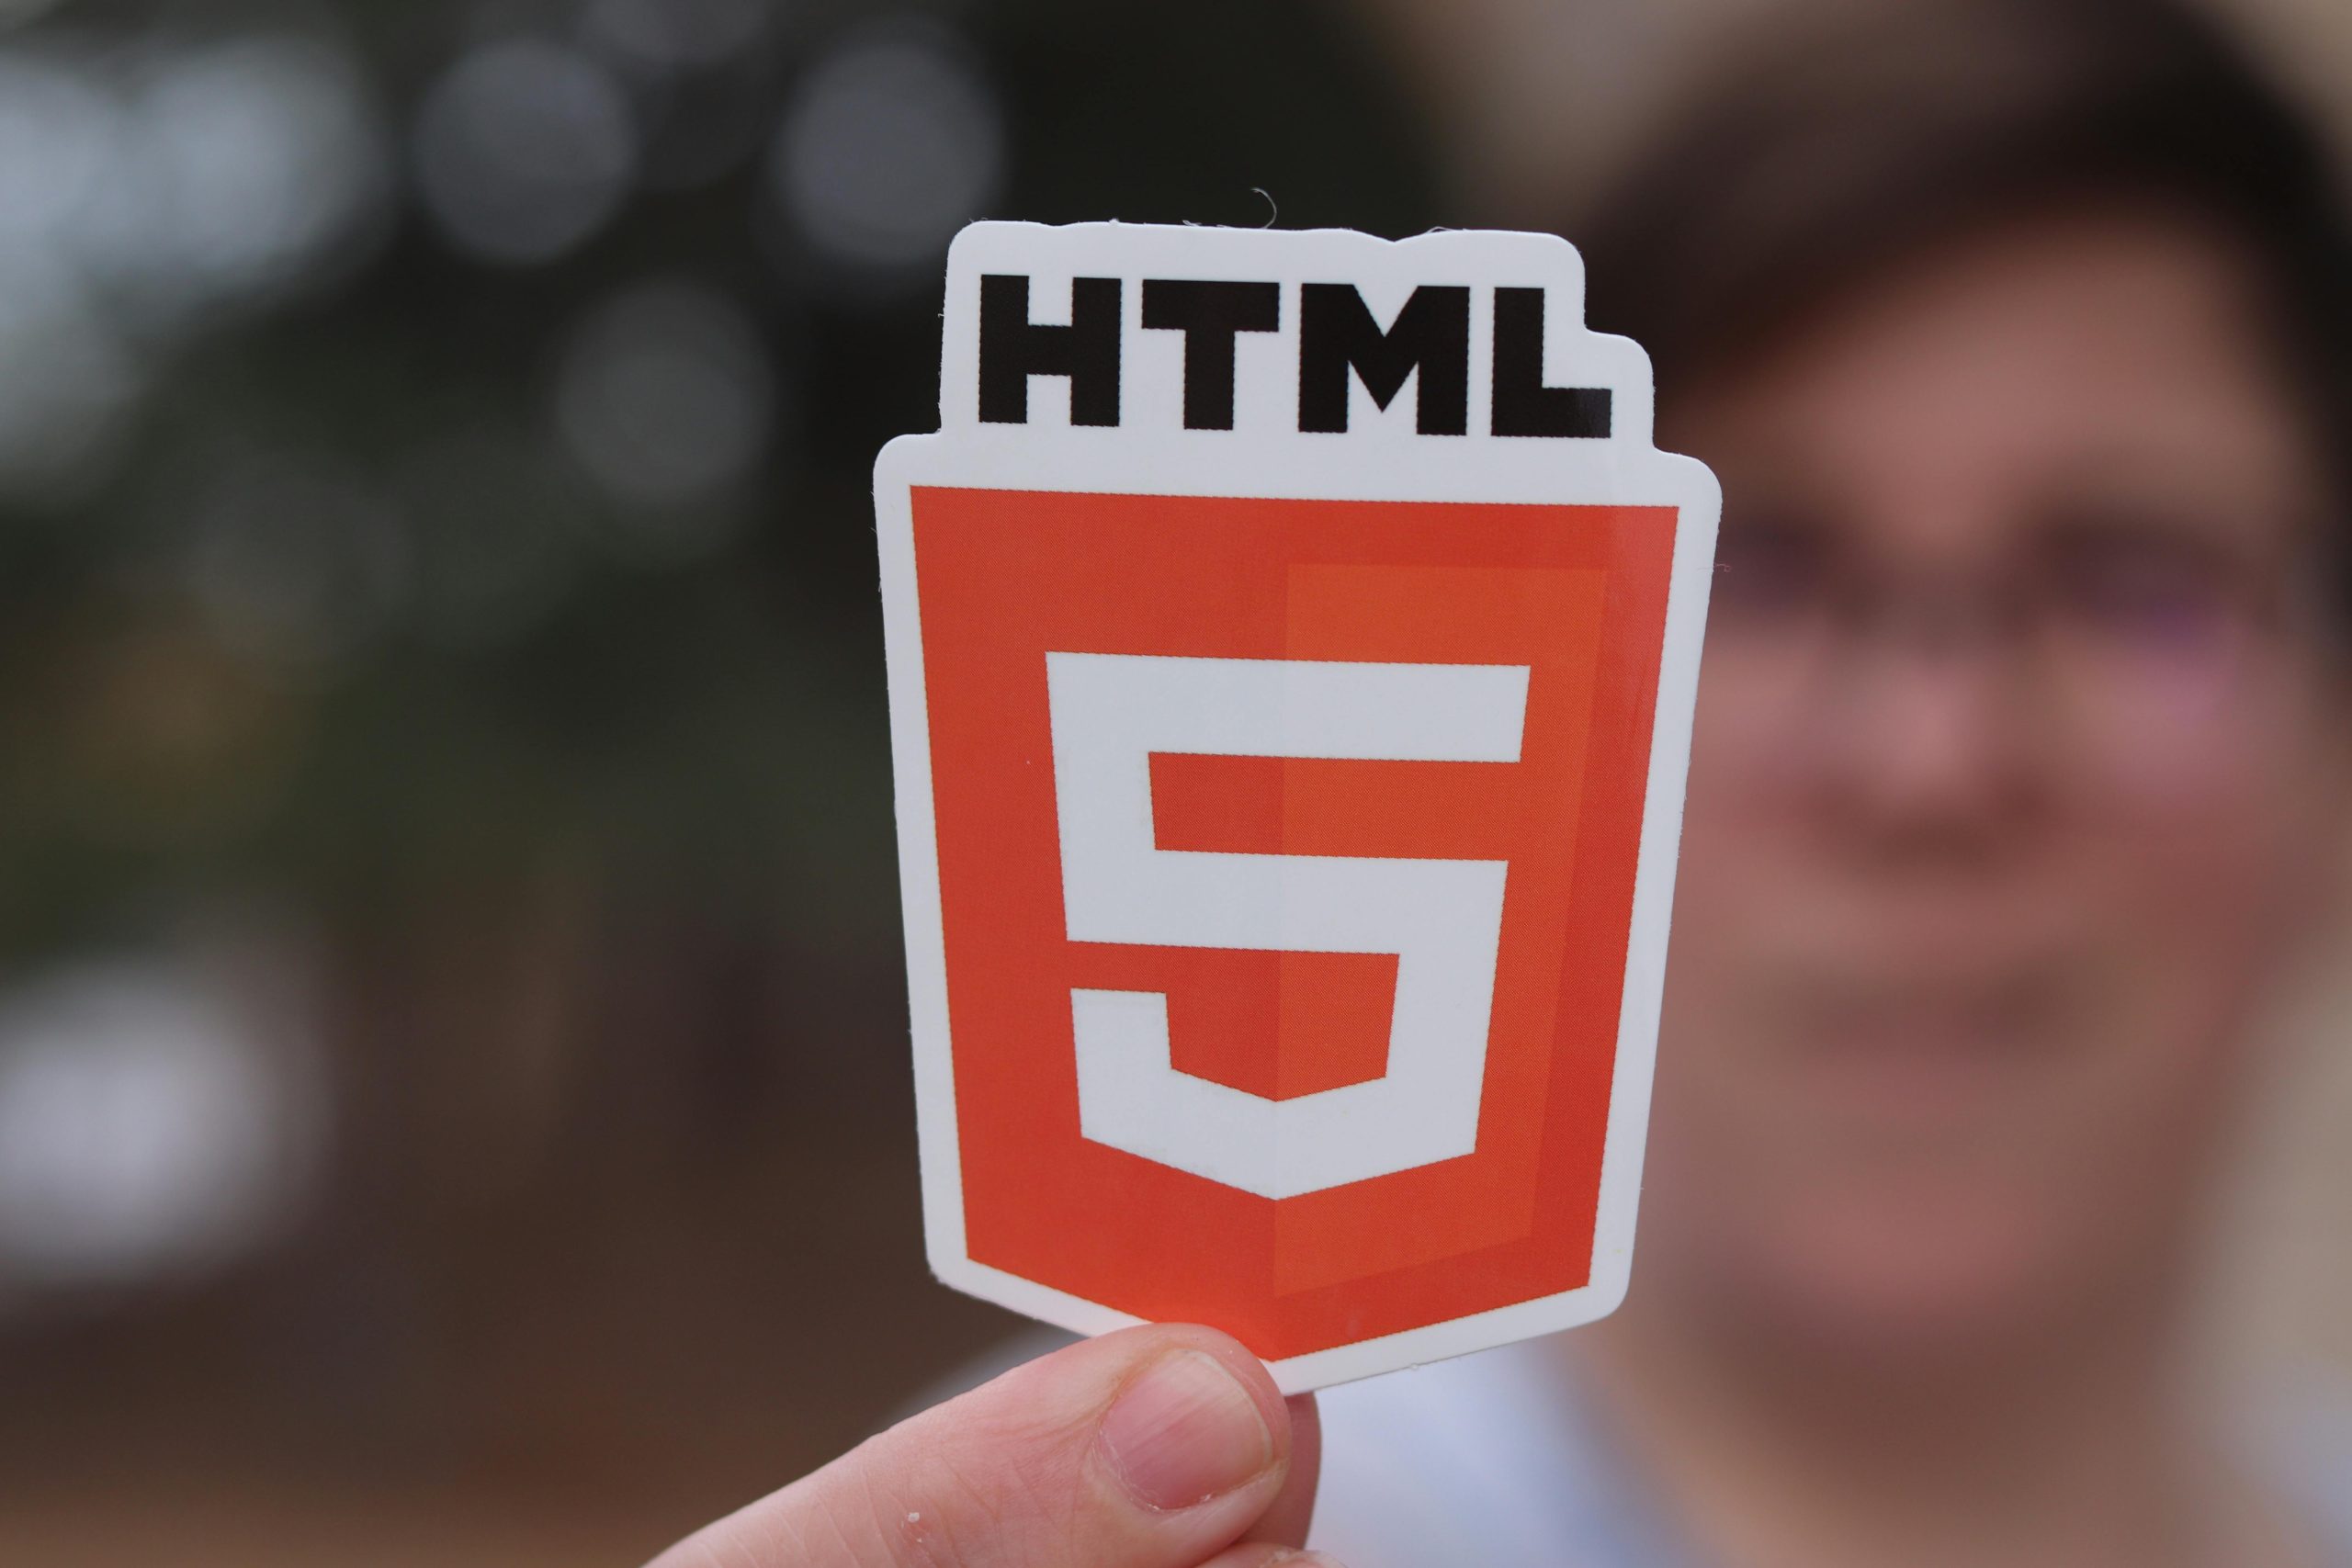 Man Holding a Paper Cutout with the HTML5 Logo